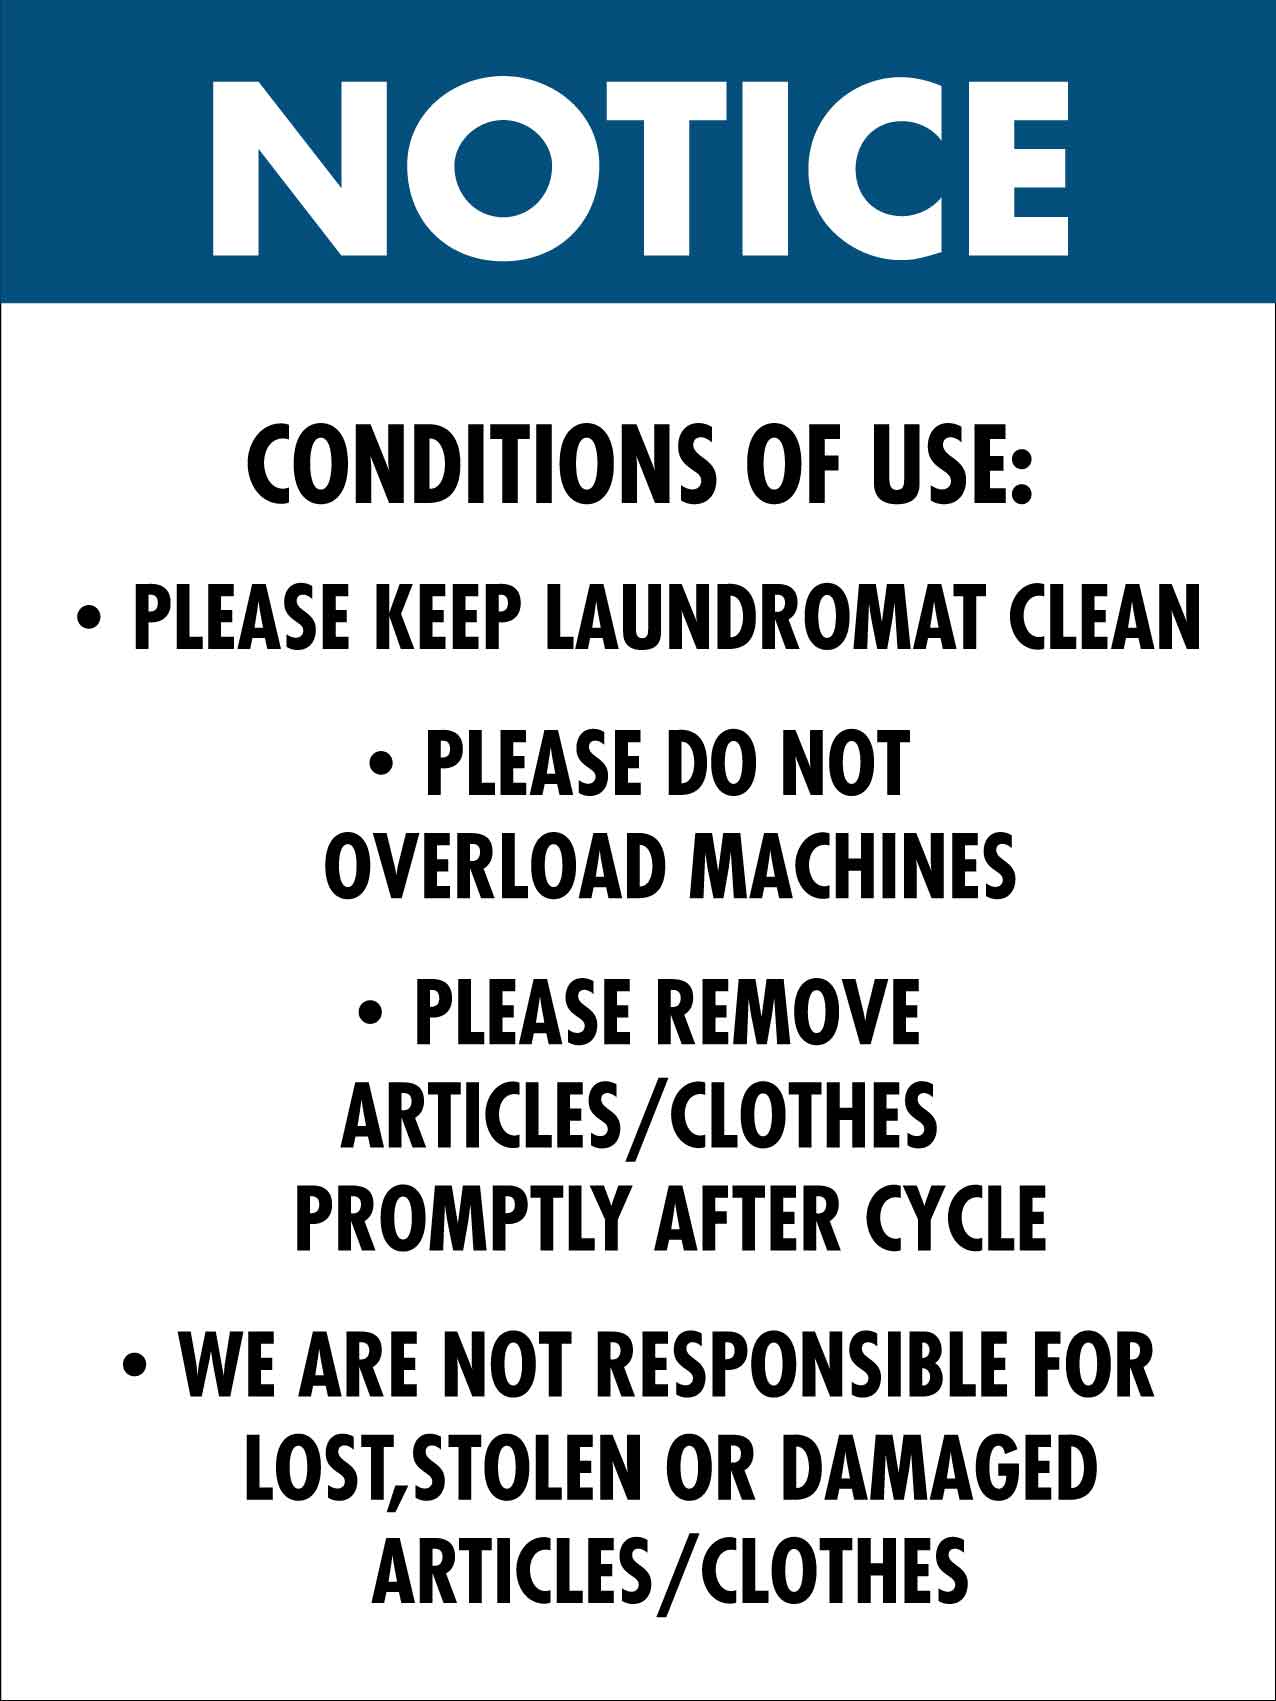 Notice Conditions Of Use Of Laundromat